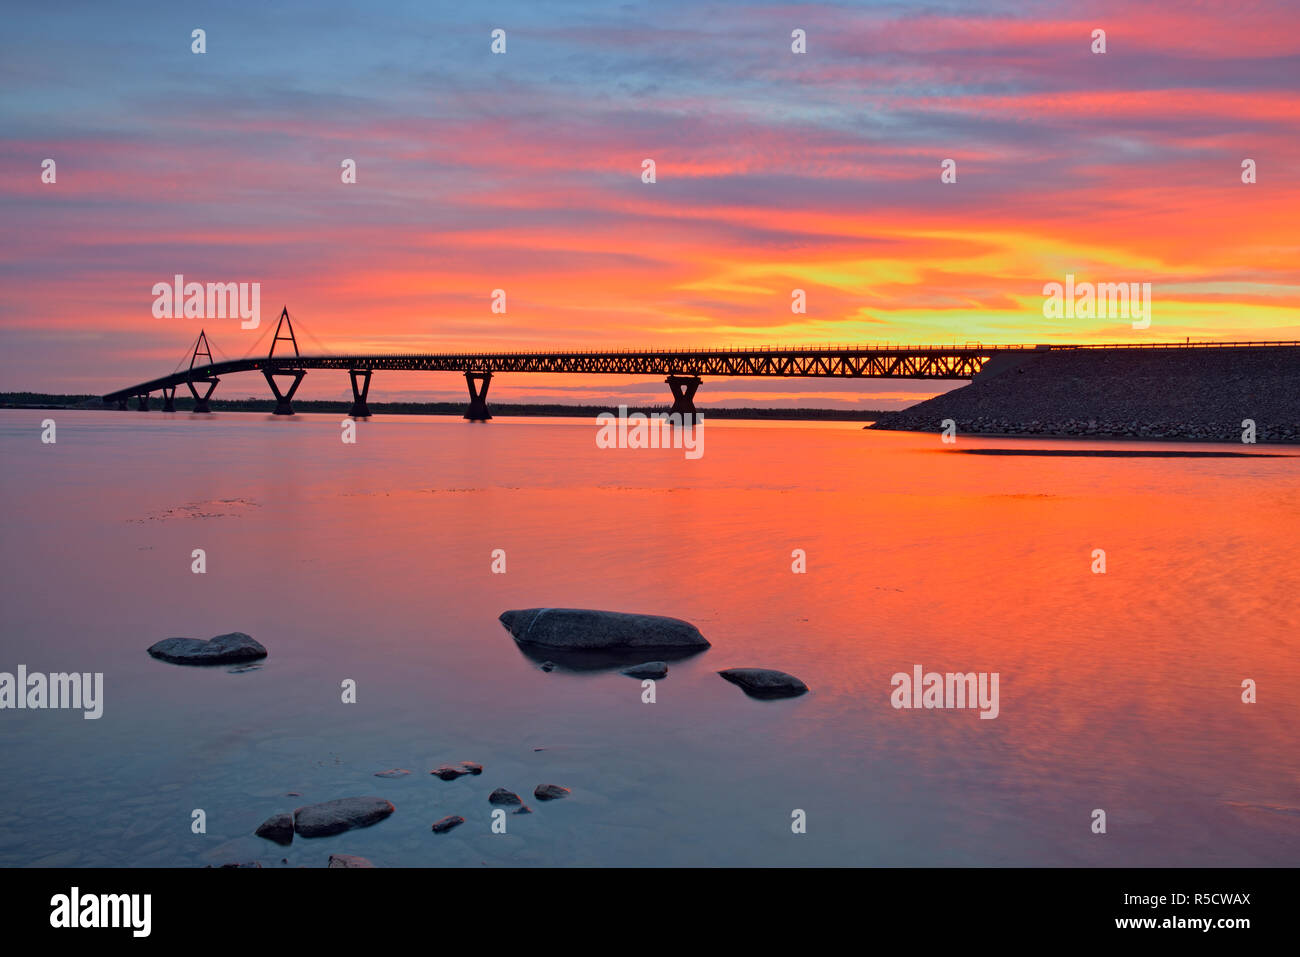 Sunrise over the MacKenzie River with the Deh Cho Bridge, Fort Providence, Northwest Territories, Canada Stock Photo